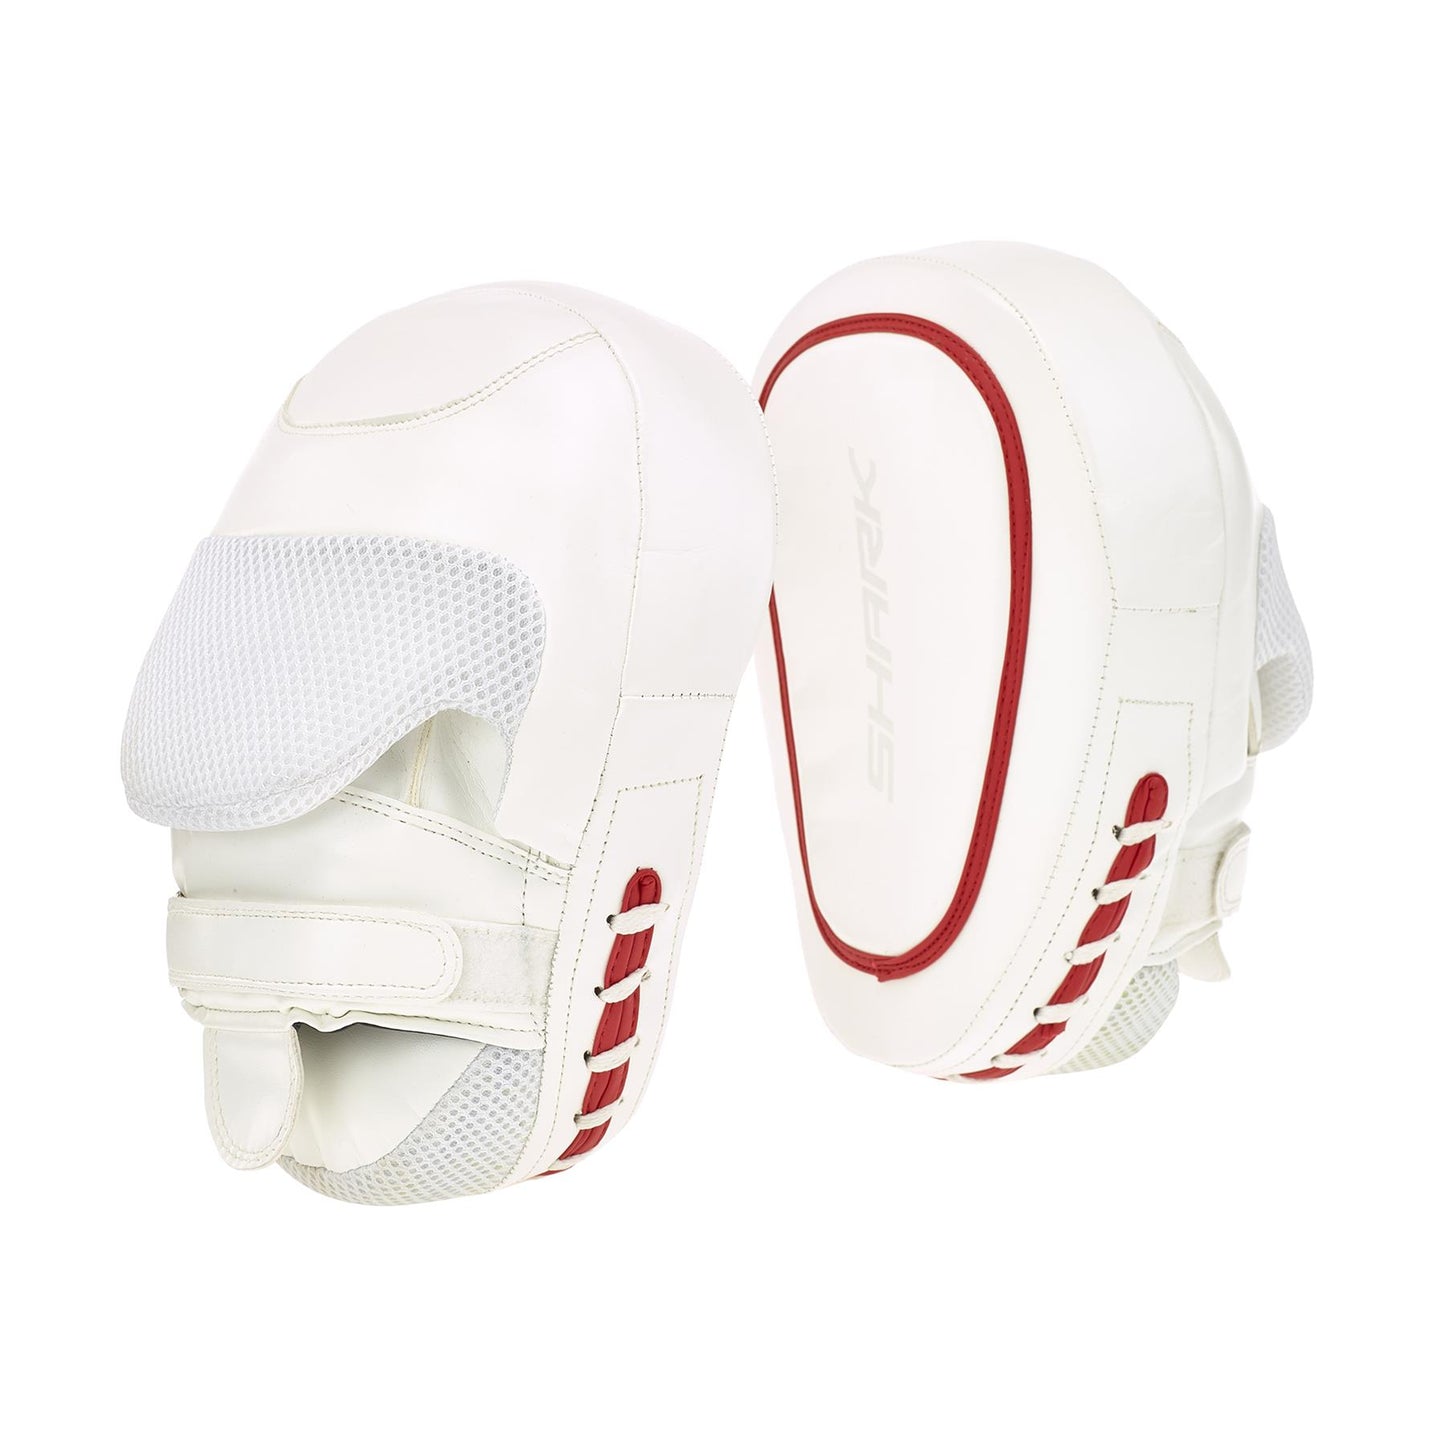 VIP White Shark Training Pro DX Lenta PU Hide Boxing Pads Curved Focus Mitts Training Pads With Adjustable Strap &4 Layer Support Construction